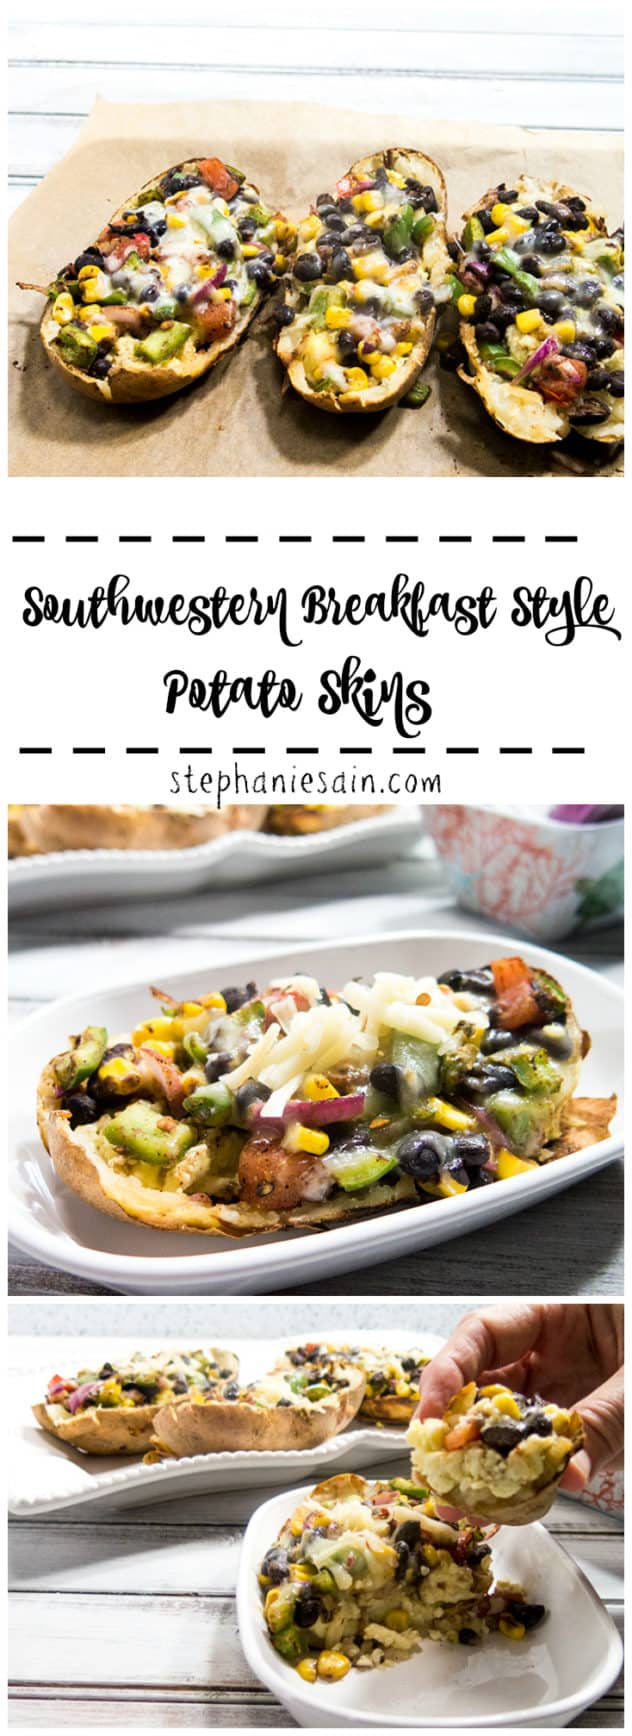 Southwestern Breakfast Style Potato Skins are a healthy, tasty, protein packed breakfast to start your day off right. Vegetarian and Gluten Free.